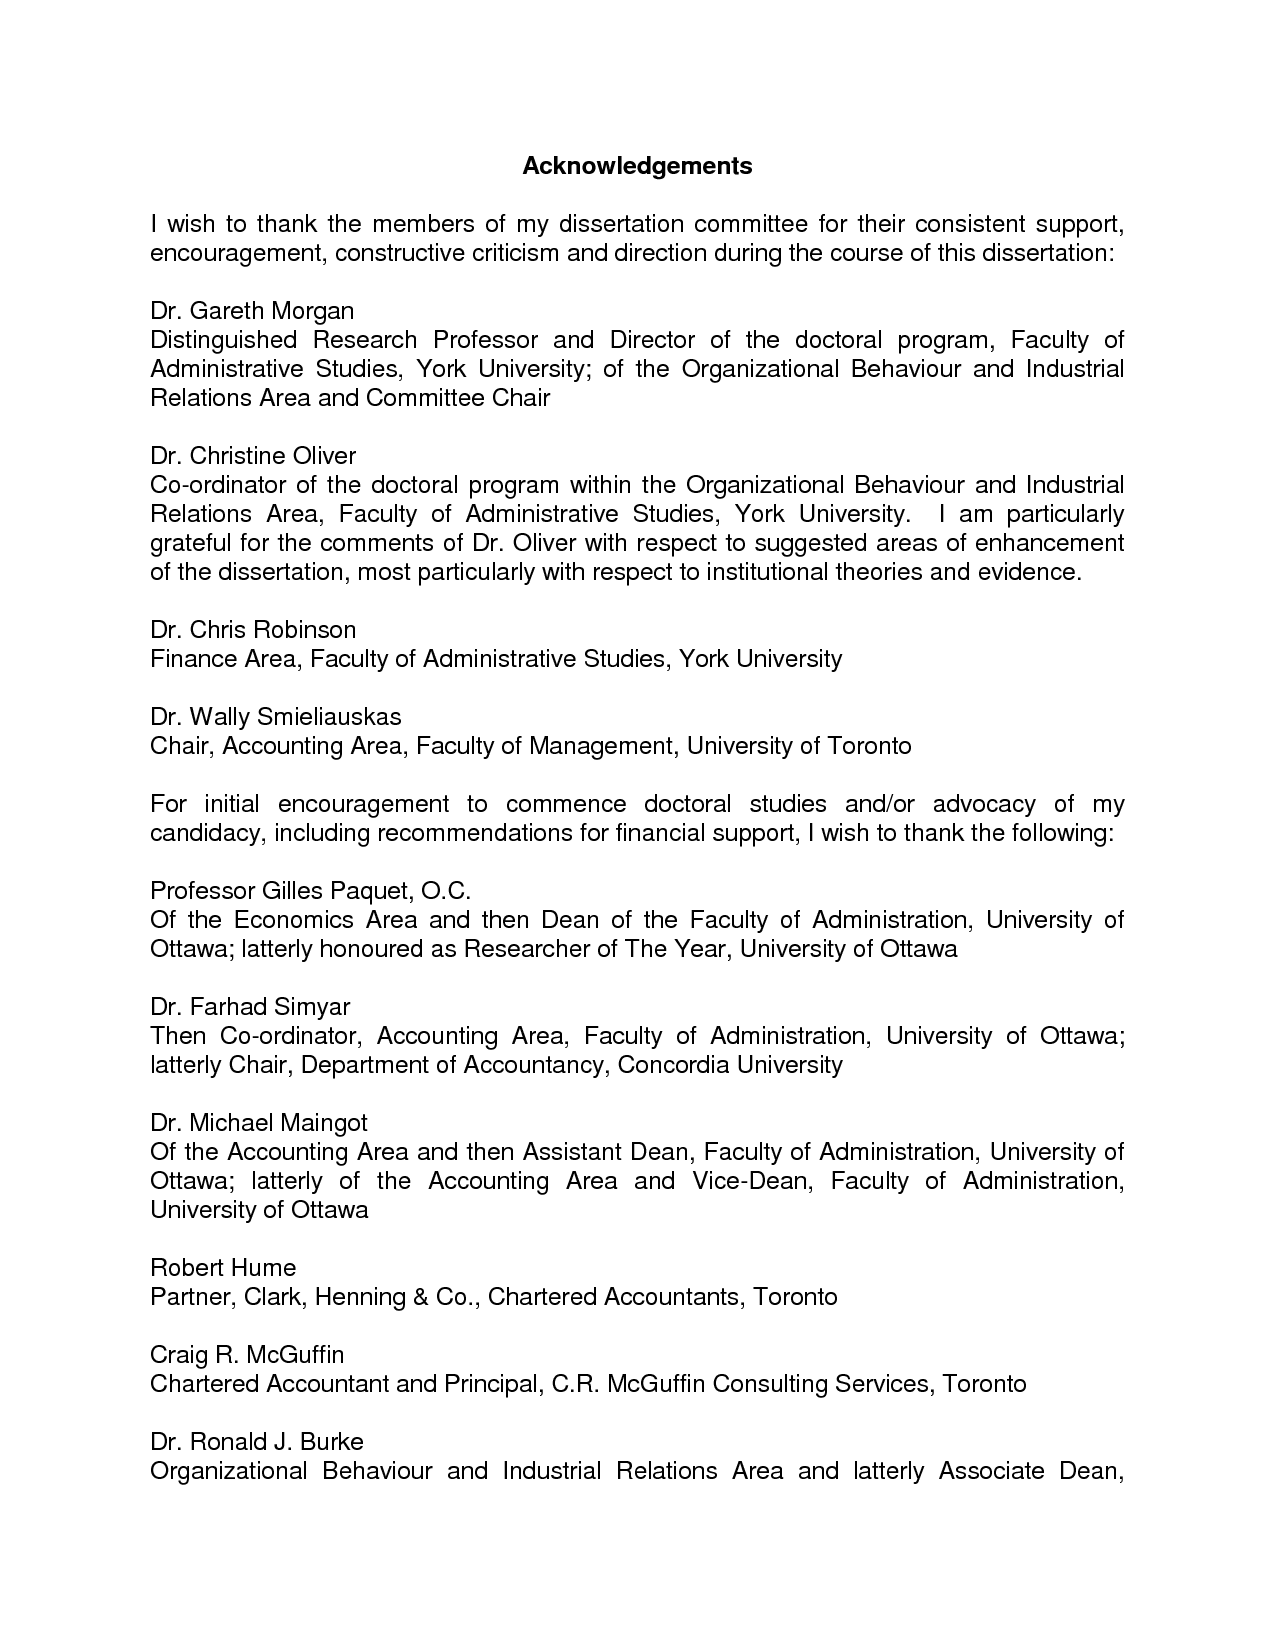 Thesis order acknowledgements